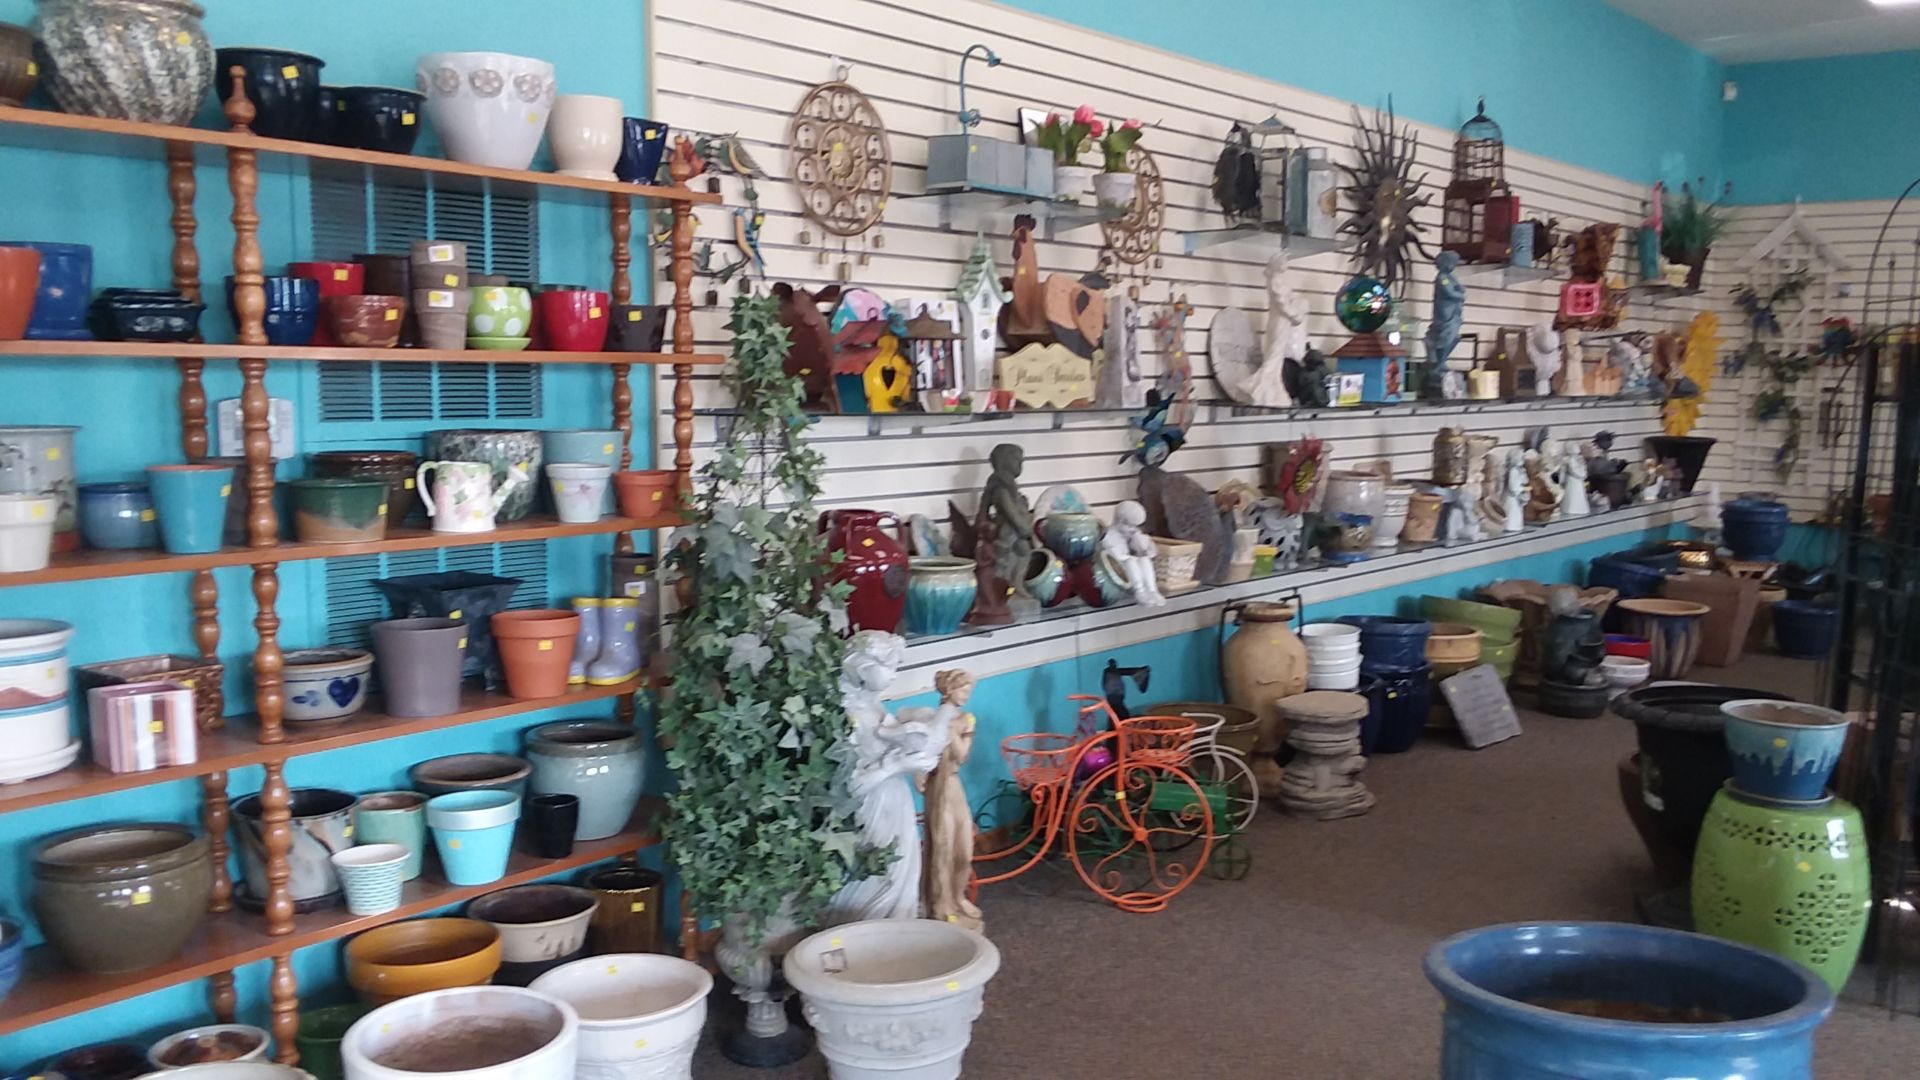 A display of lawn and garden supplies including large planter pots and decor.